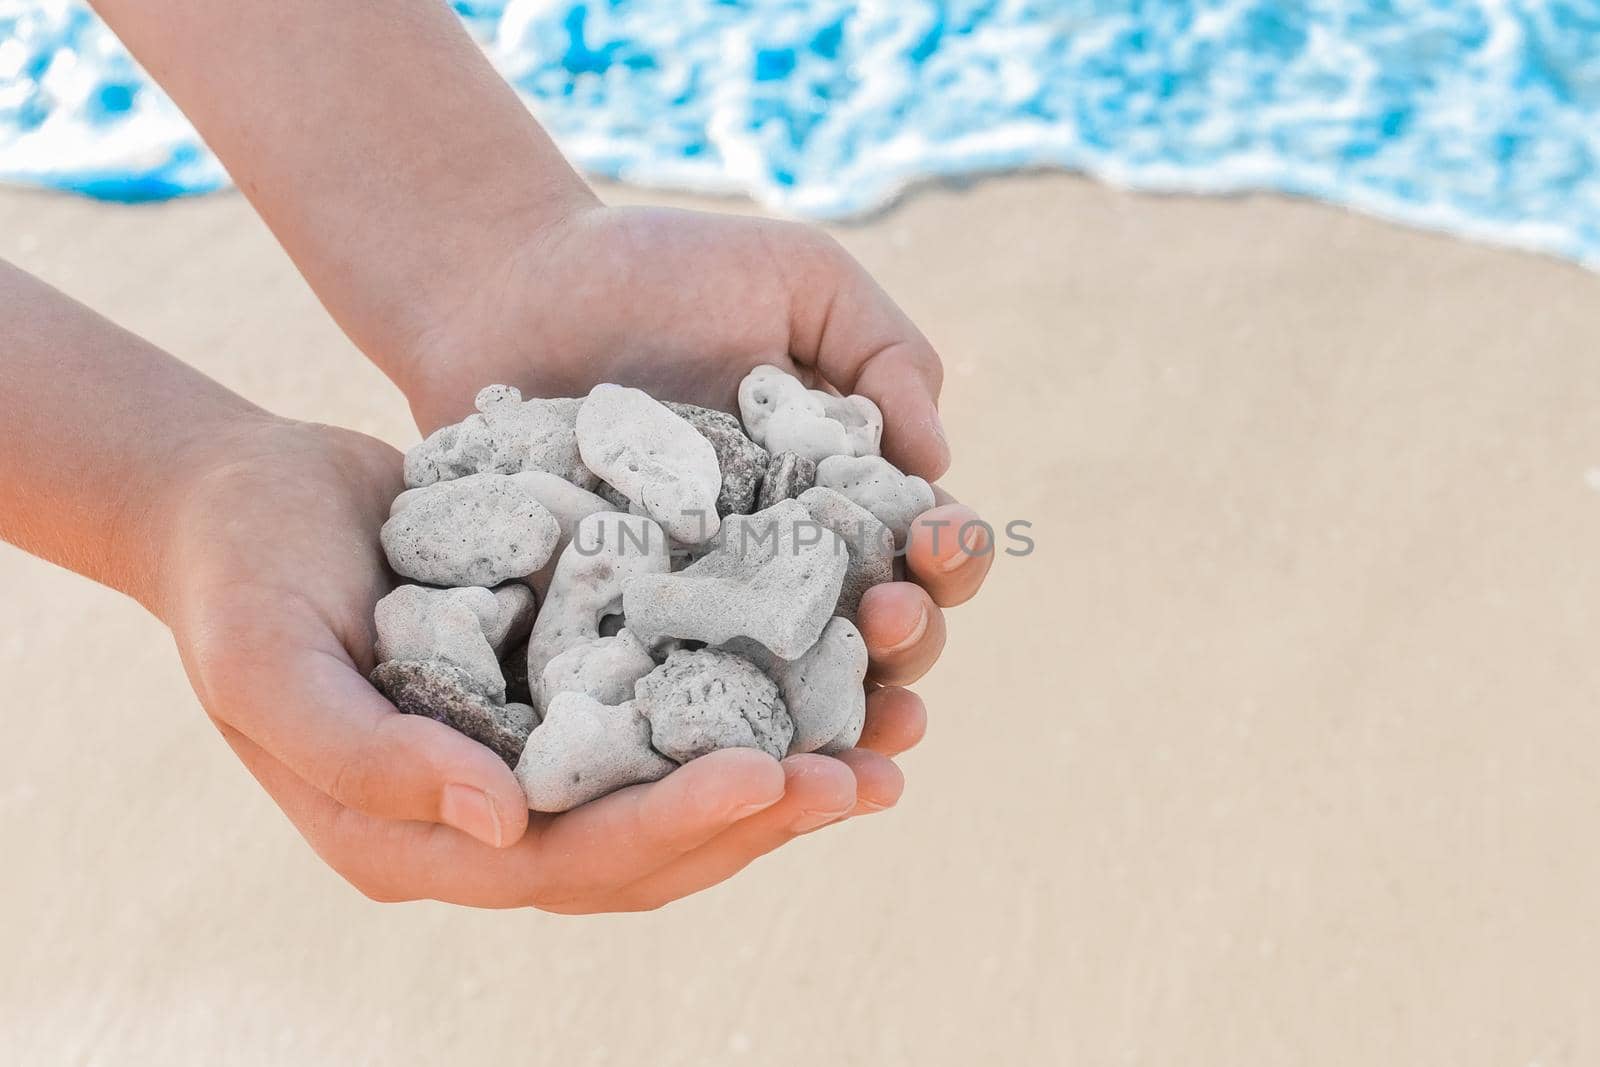 Man's hands hold pile of grey stones amid seashore close-up.